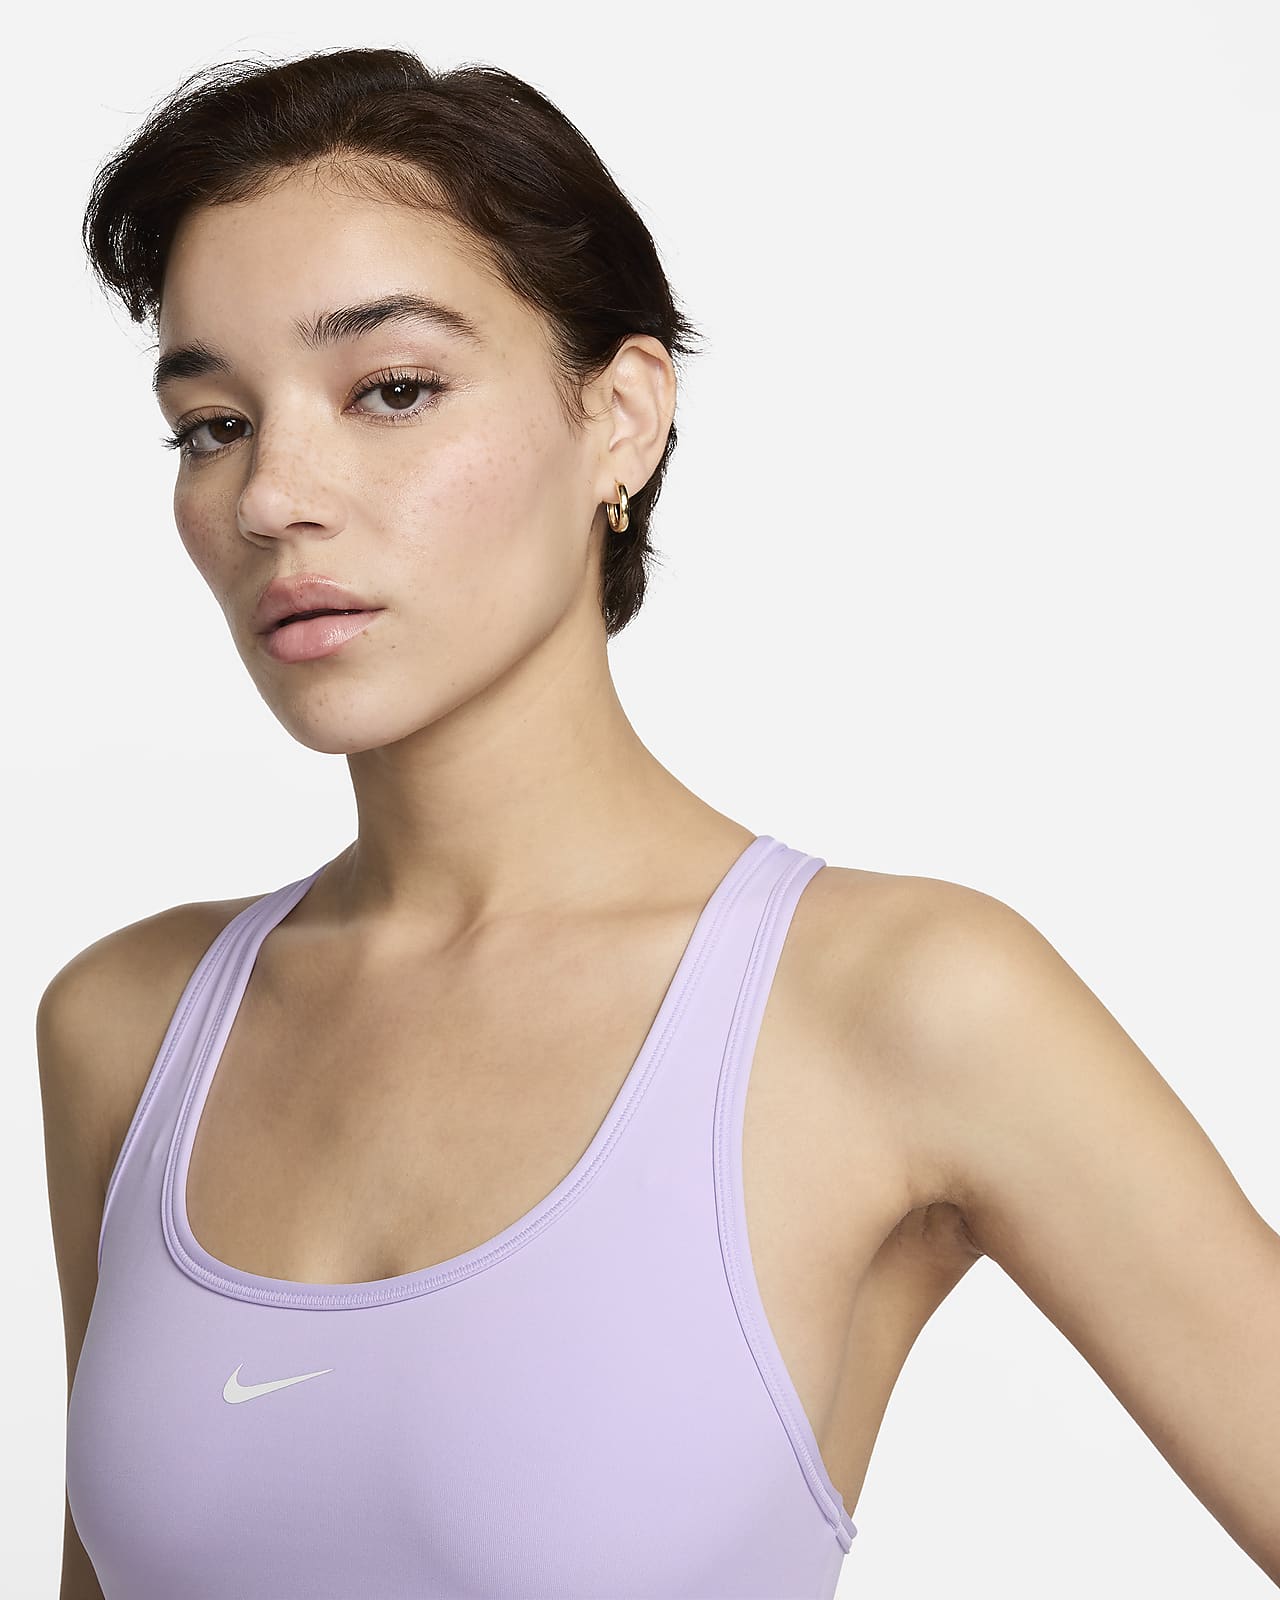 NIKE Swoosh Women's Sports Bra In color olive Style: CK1934 Size Extra Small  (4)